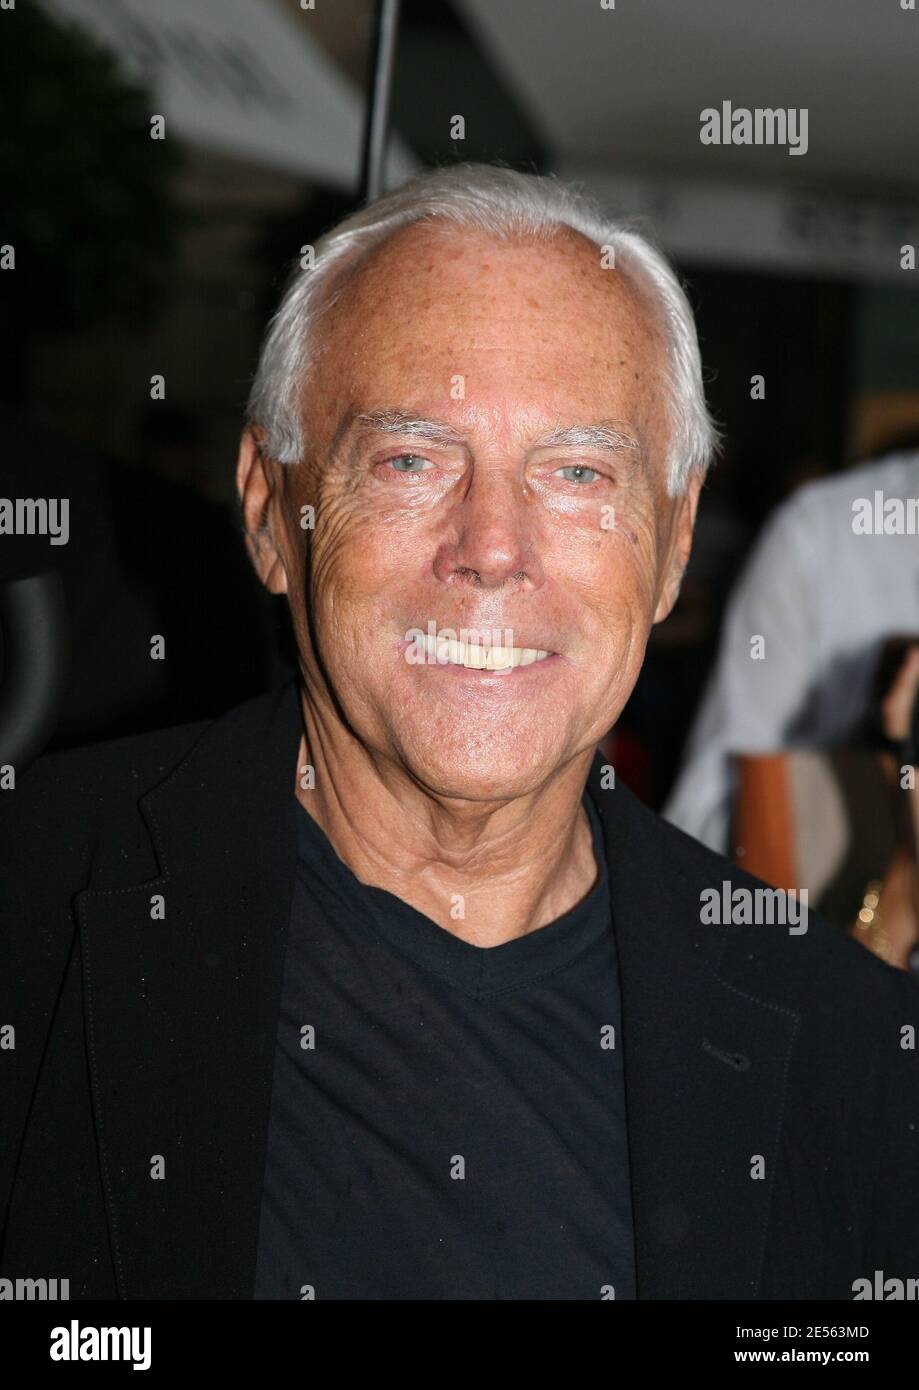 Designer Giorgio Armani attends Valentino Fall-Winter 2008-2009  Haute-Couture collection show in Paris, France on July 2, 2008. Photo by  Denis Guignebourg/ABACAPRESS.COM Stock Photo - Alamy